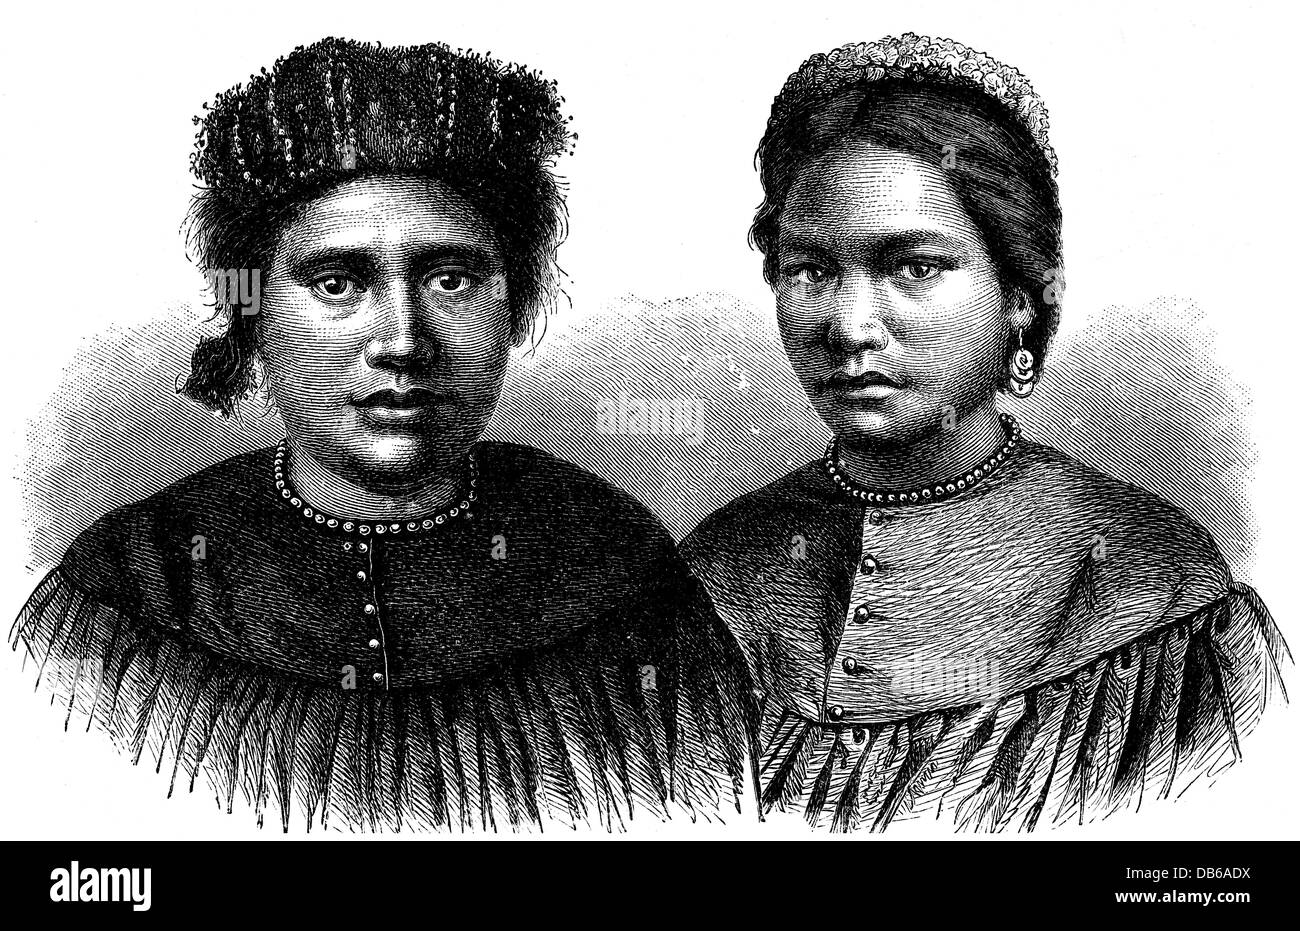 geography / travel, USA, people, women from Hawaii, portraits, wood engraving, 2nd half 19th century, sandwich islands, Polynesian, Polynesians, polynesia, Pacific, Pacific Ocean, Oceania, isle, islands, historic, historical, Additional-Rights-Clearences-Not Available Stock Photo